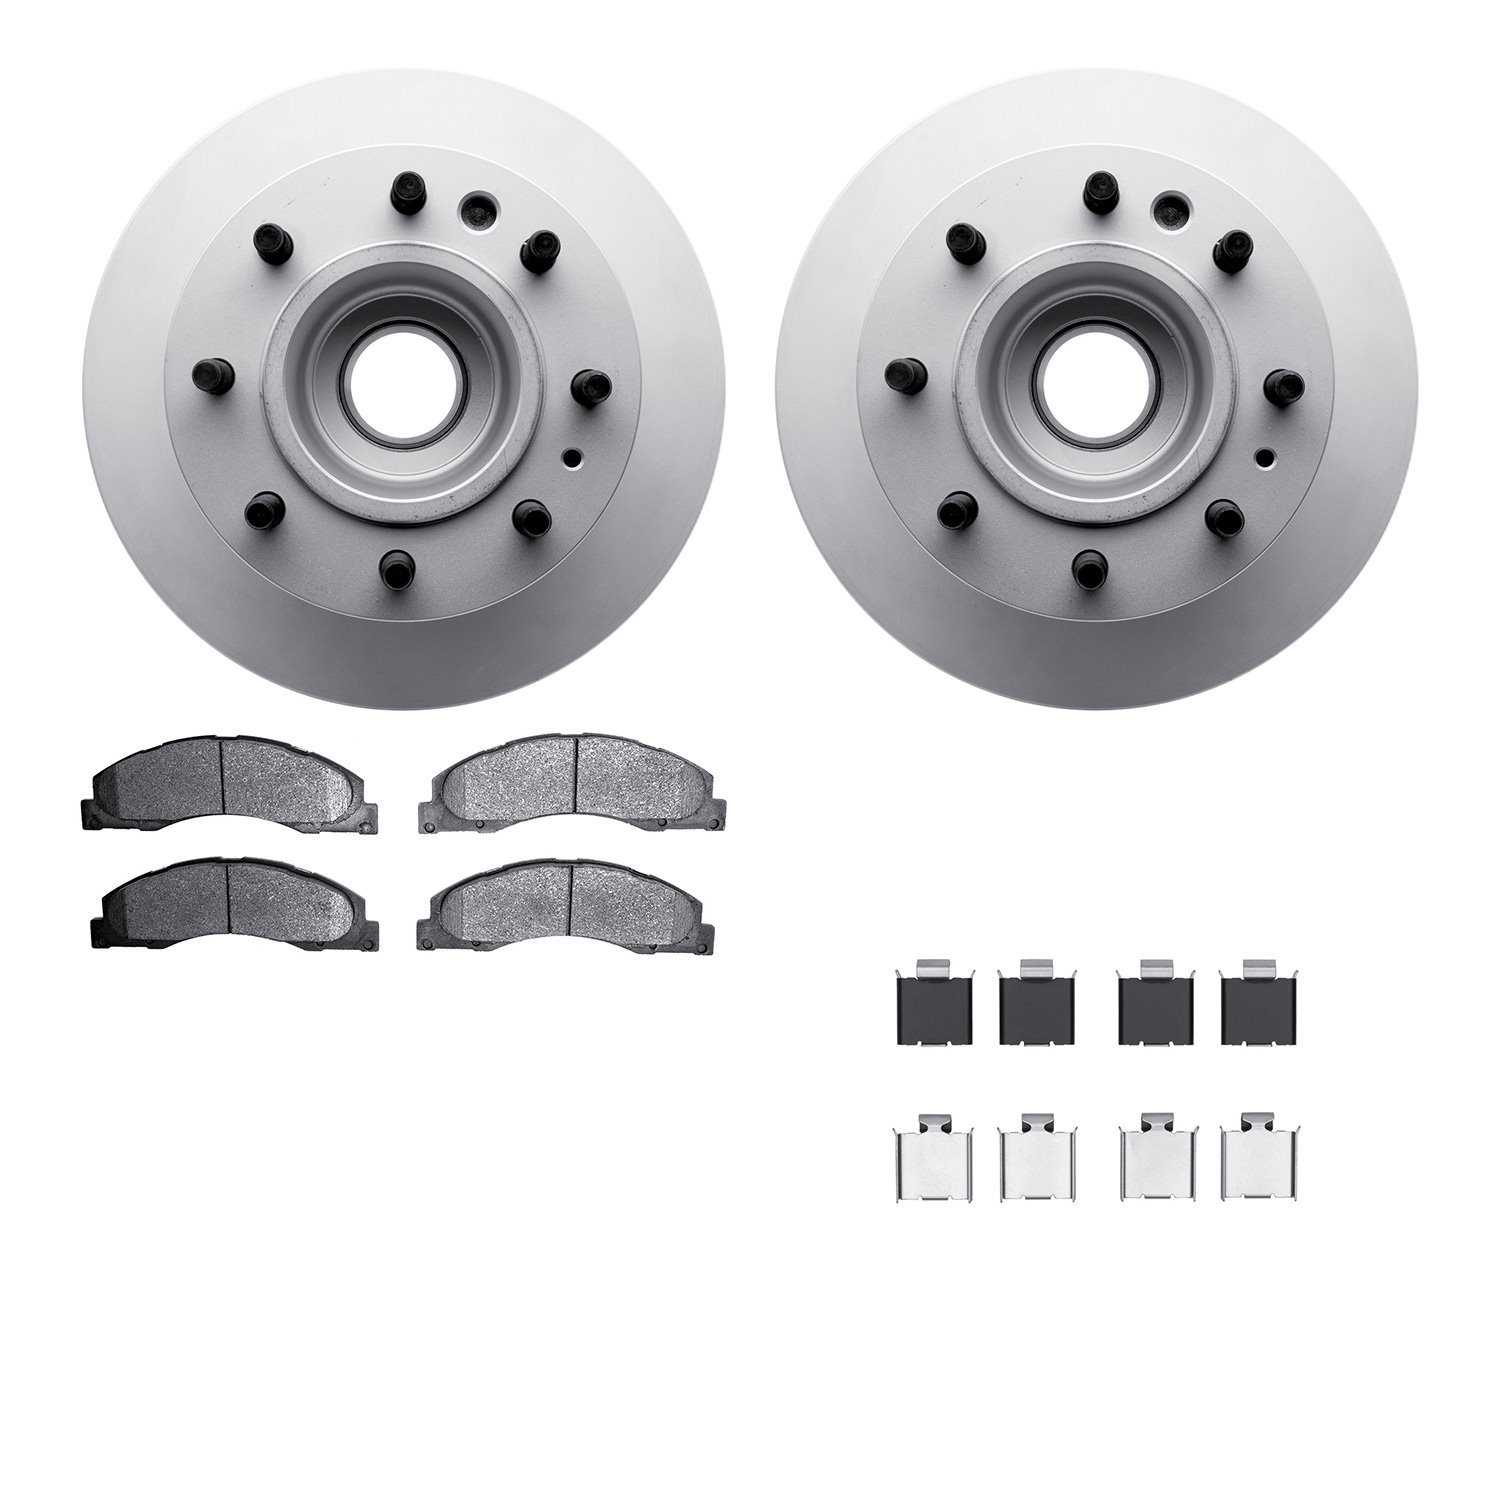 4212-99205 Geospec Brake Rotors w/Heavy-Duty Brake Pads & Hardware, Fits Select Ford/Lincoln/Mercury/Mazda, Position: Front